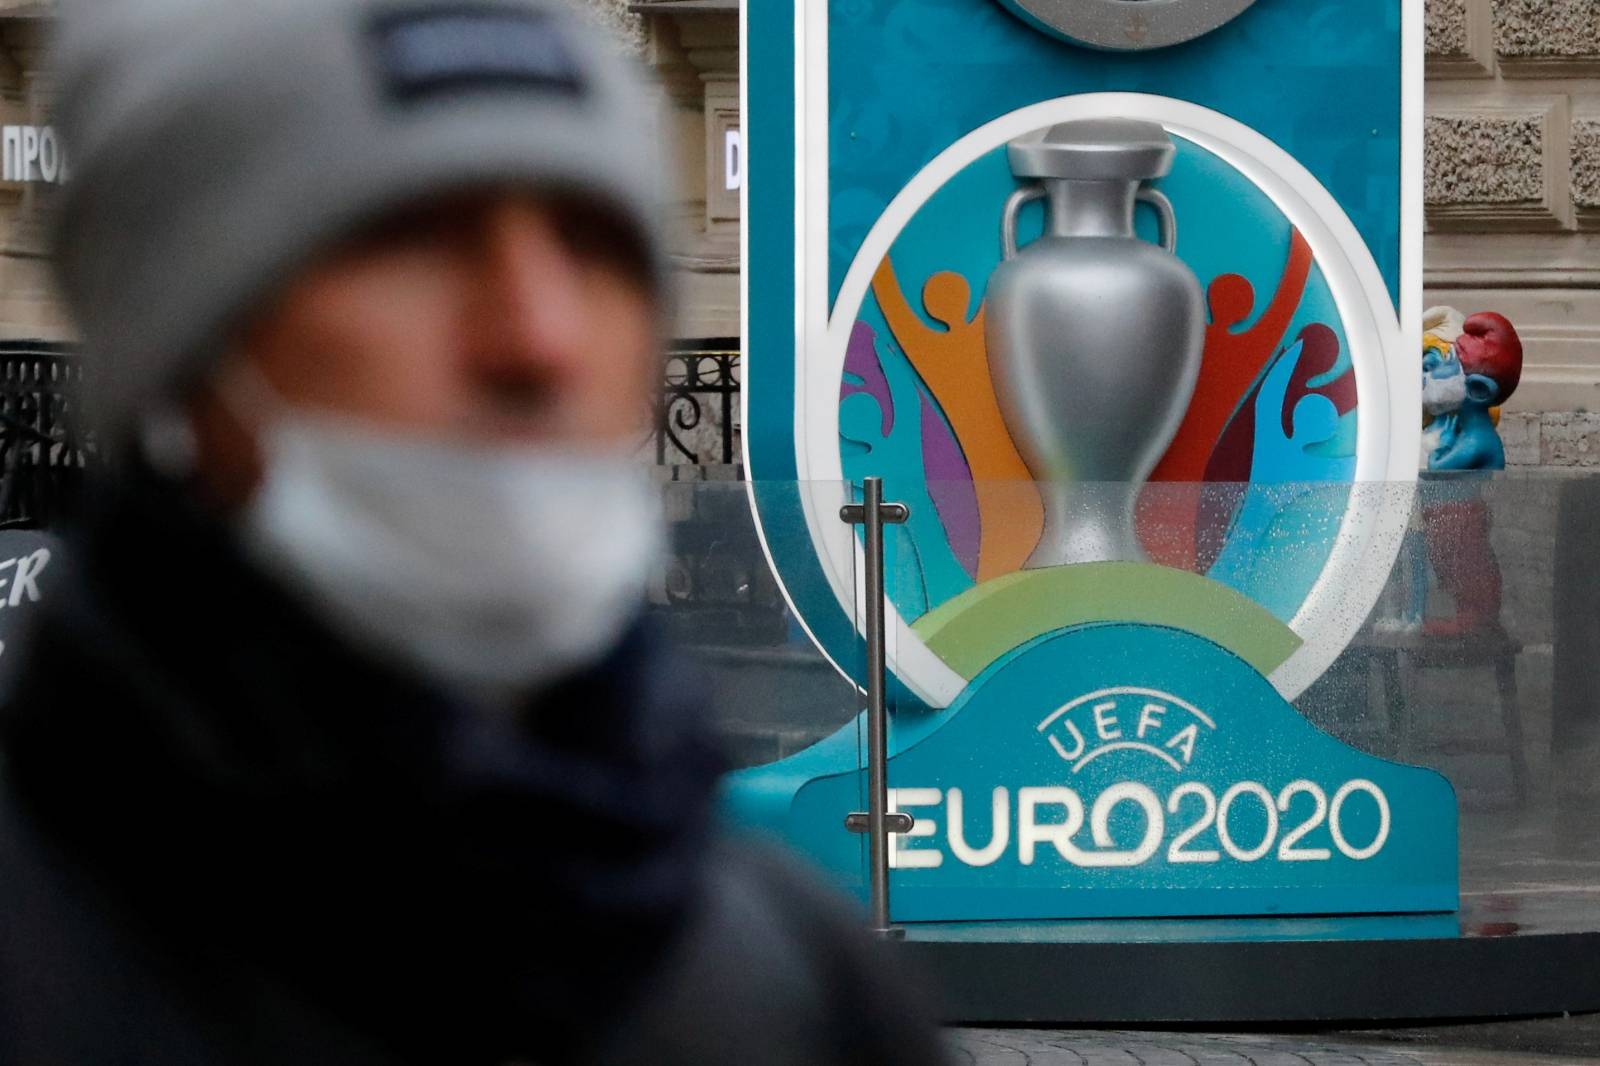 FILE PHOTO: A person wearing a protective face mask walks past the Euro 2020 countdown clock in Saint Petersburg